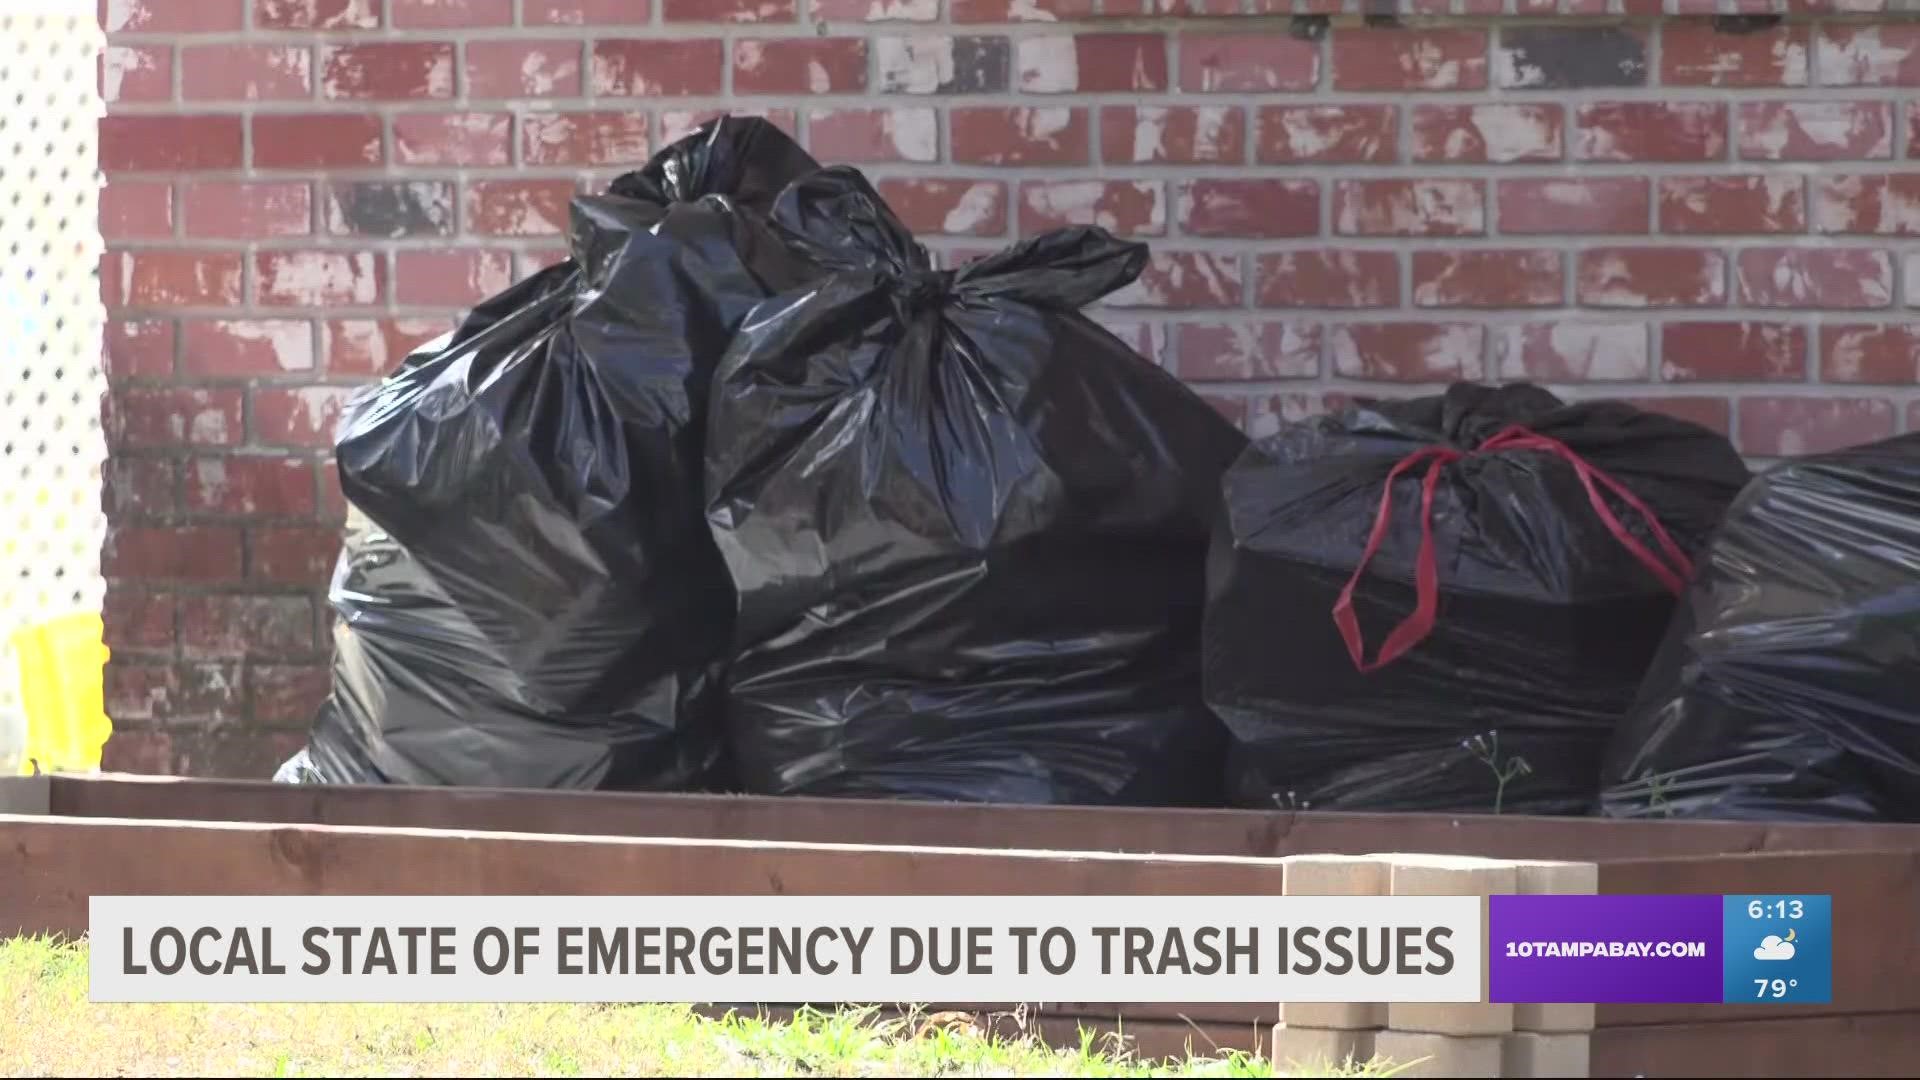 County commissioners say some residents are going weeks without their trash being picked up.